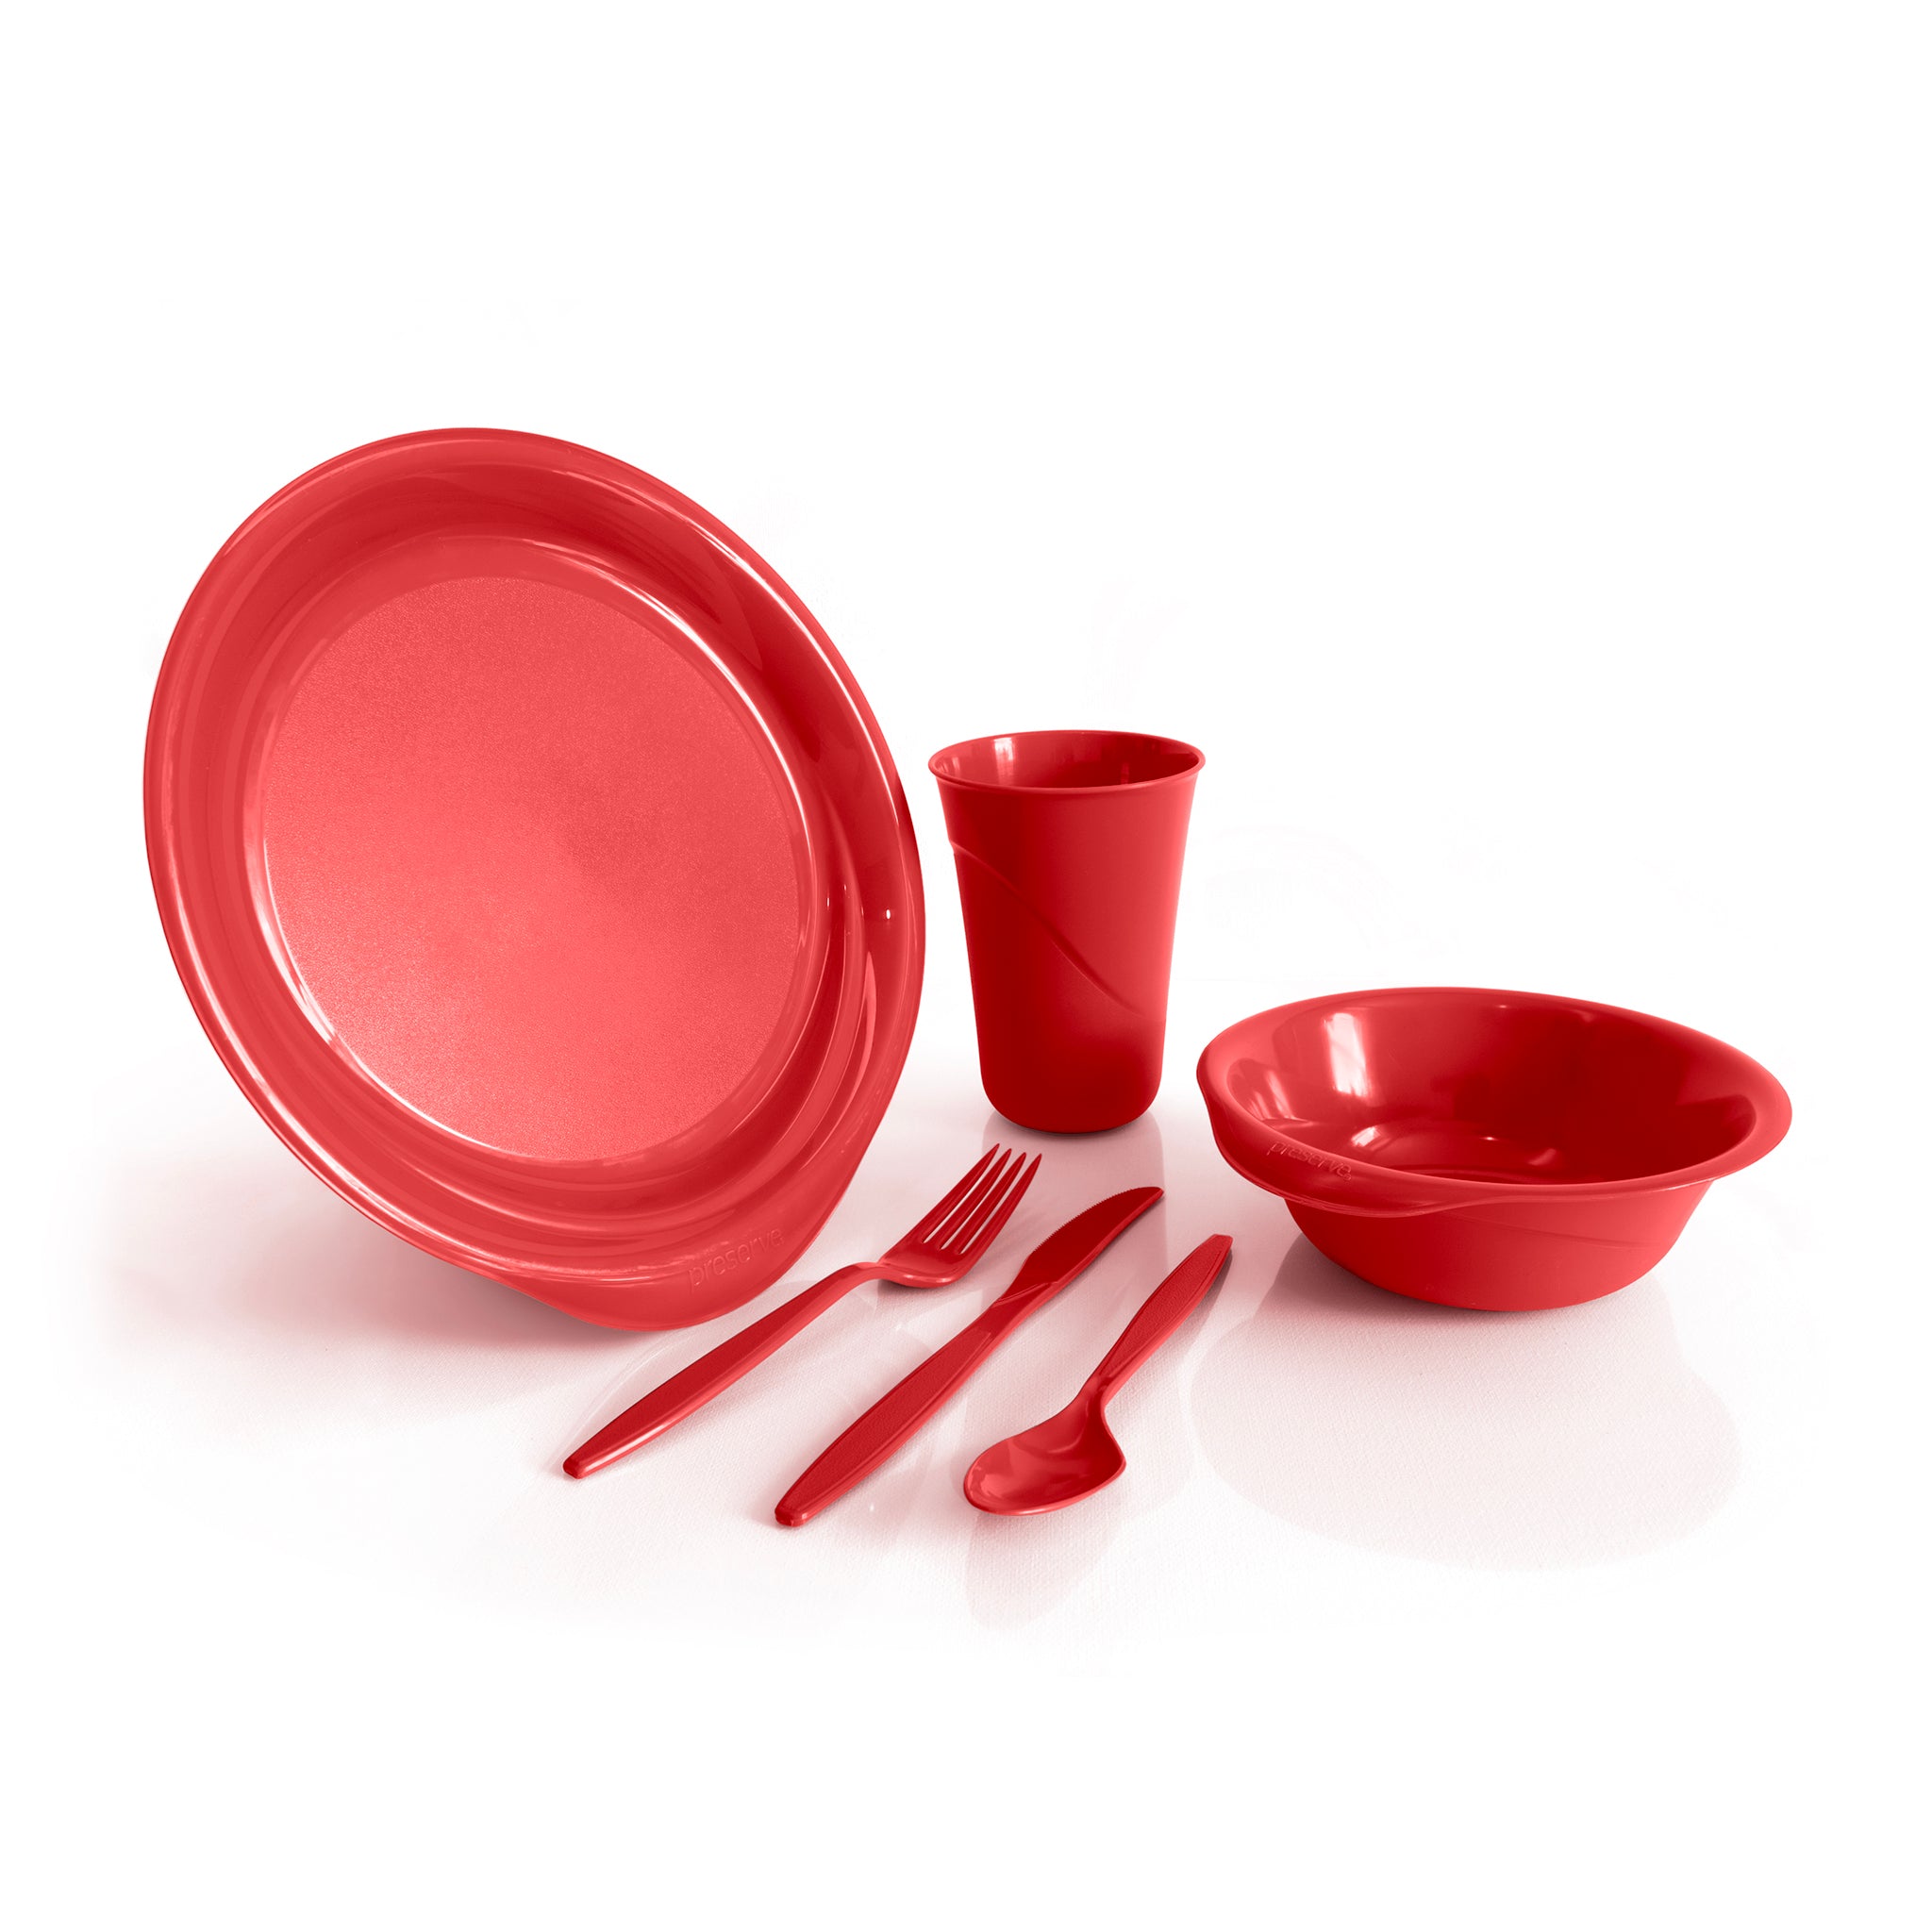 Recycled plastic tableware in red